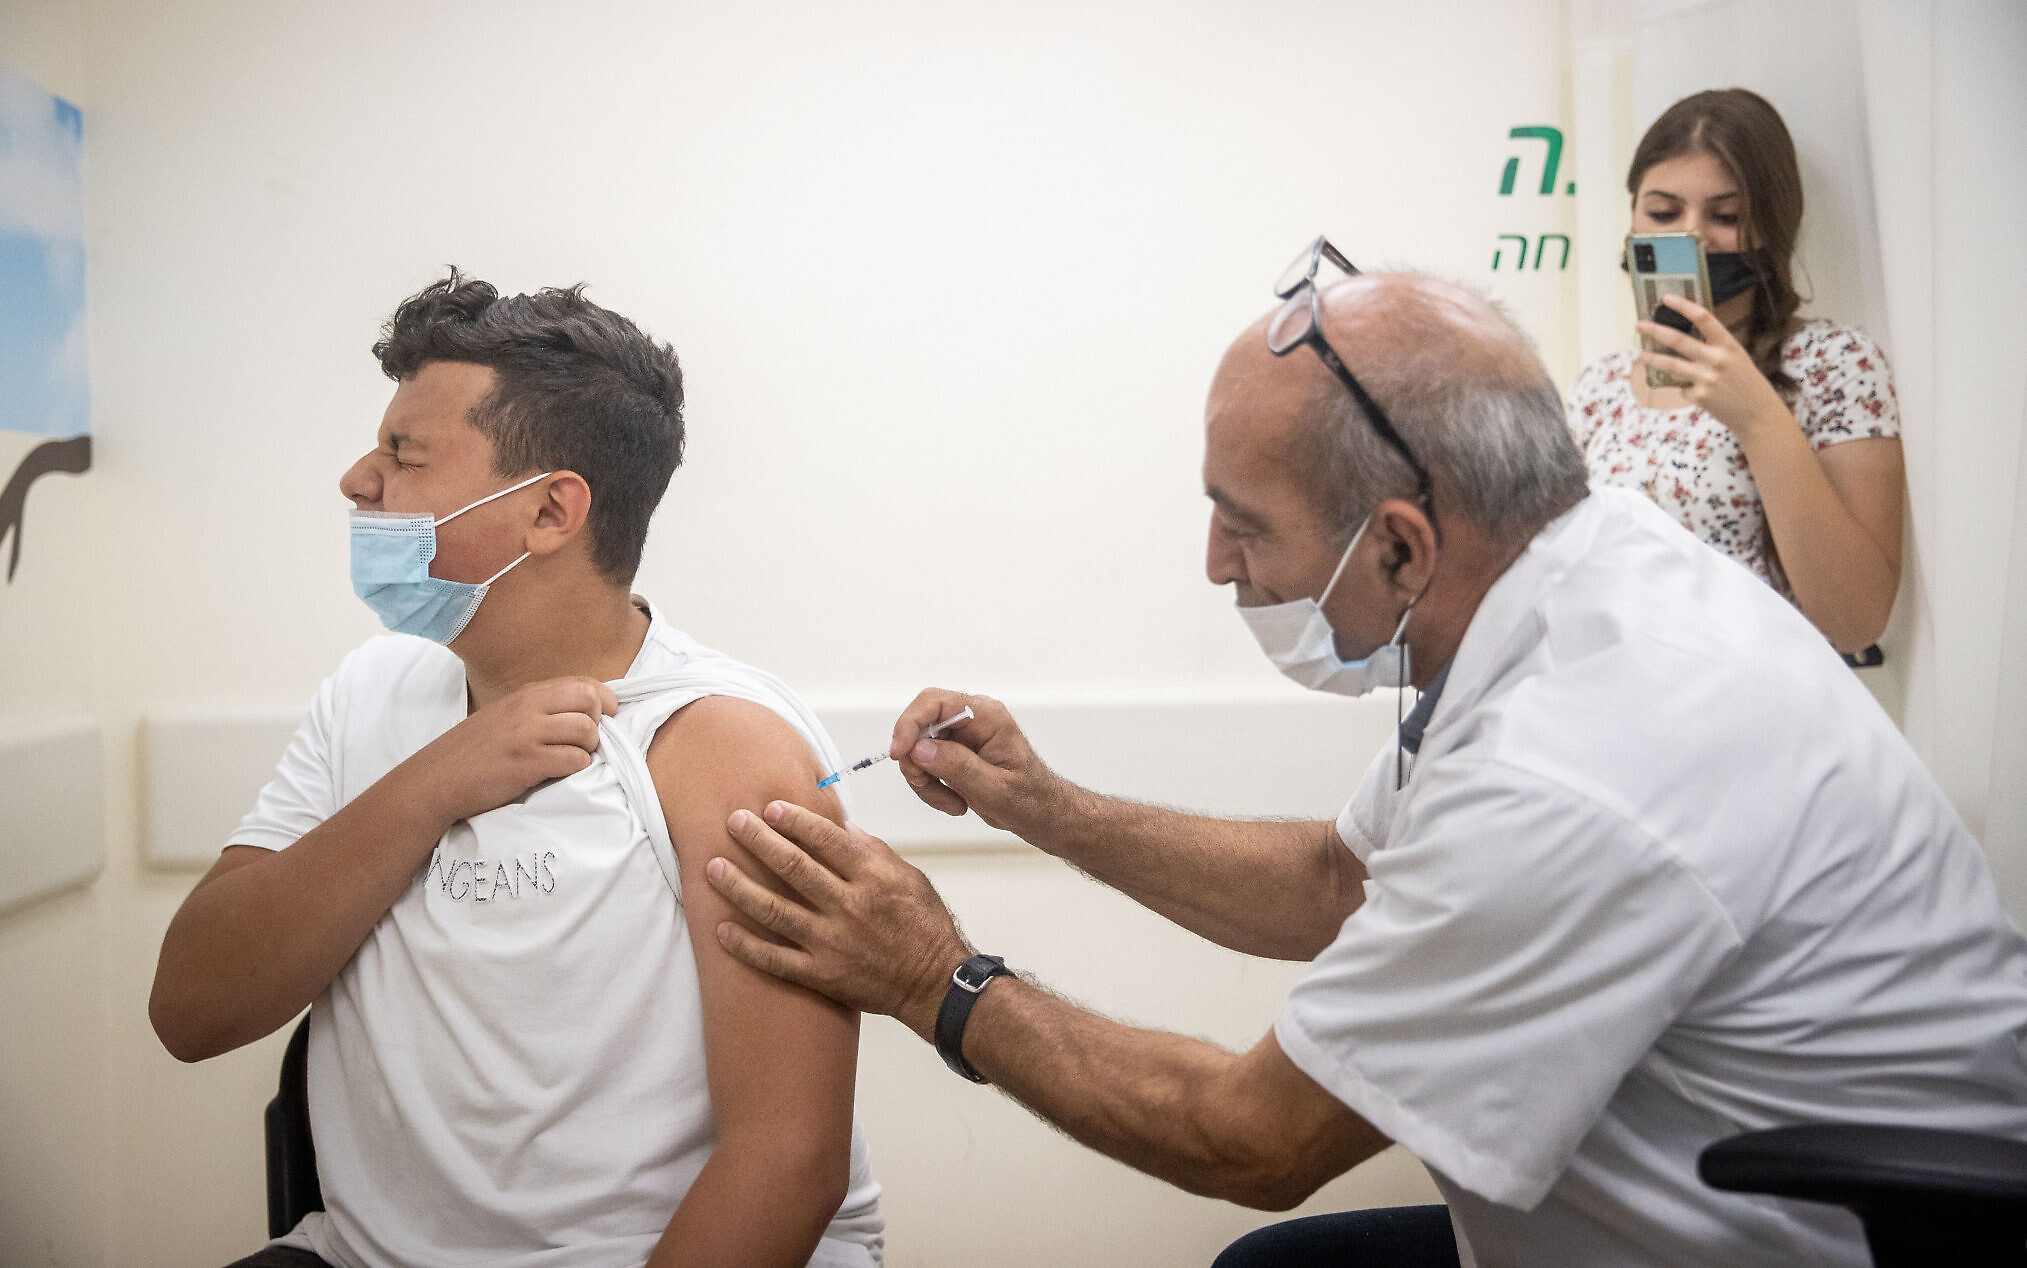 Israel may have to throw away nearly 1 million COVID vaccines | The Times of Israel